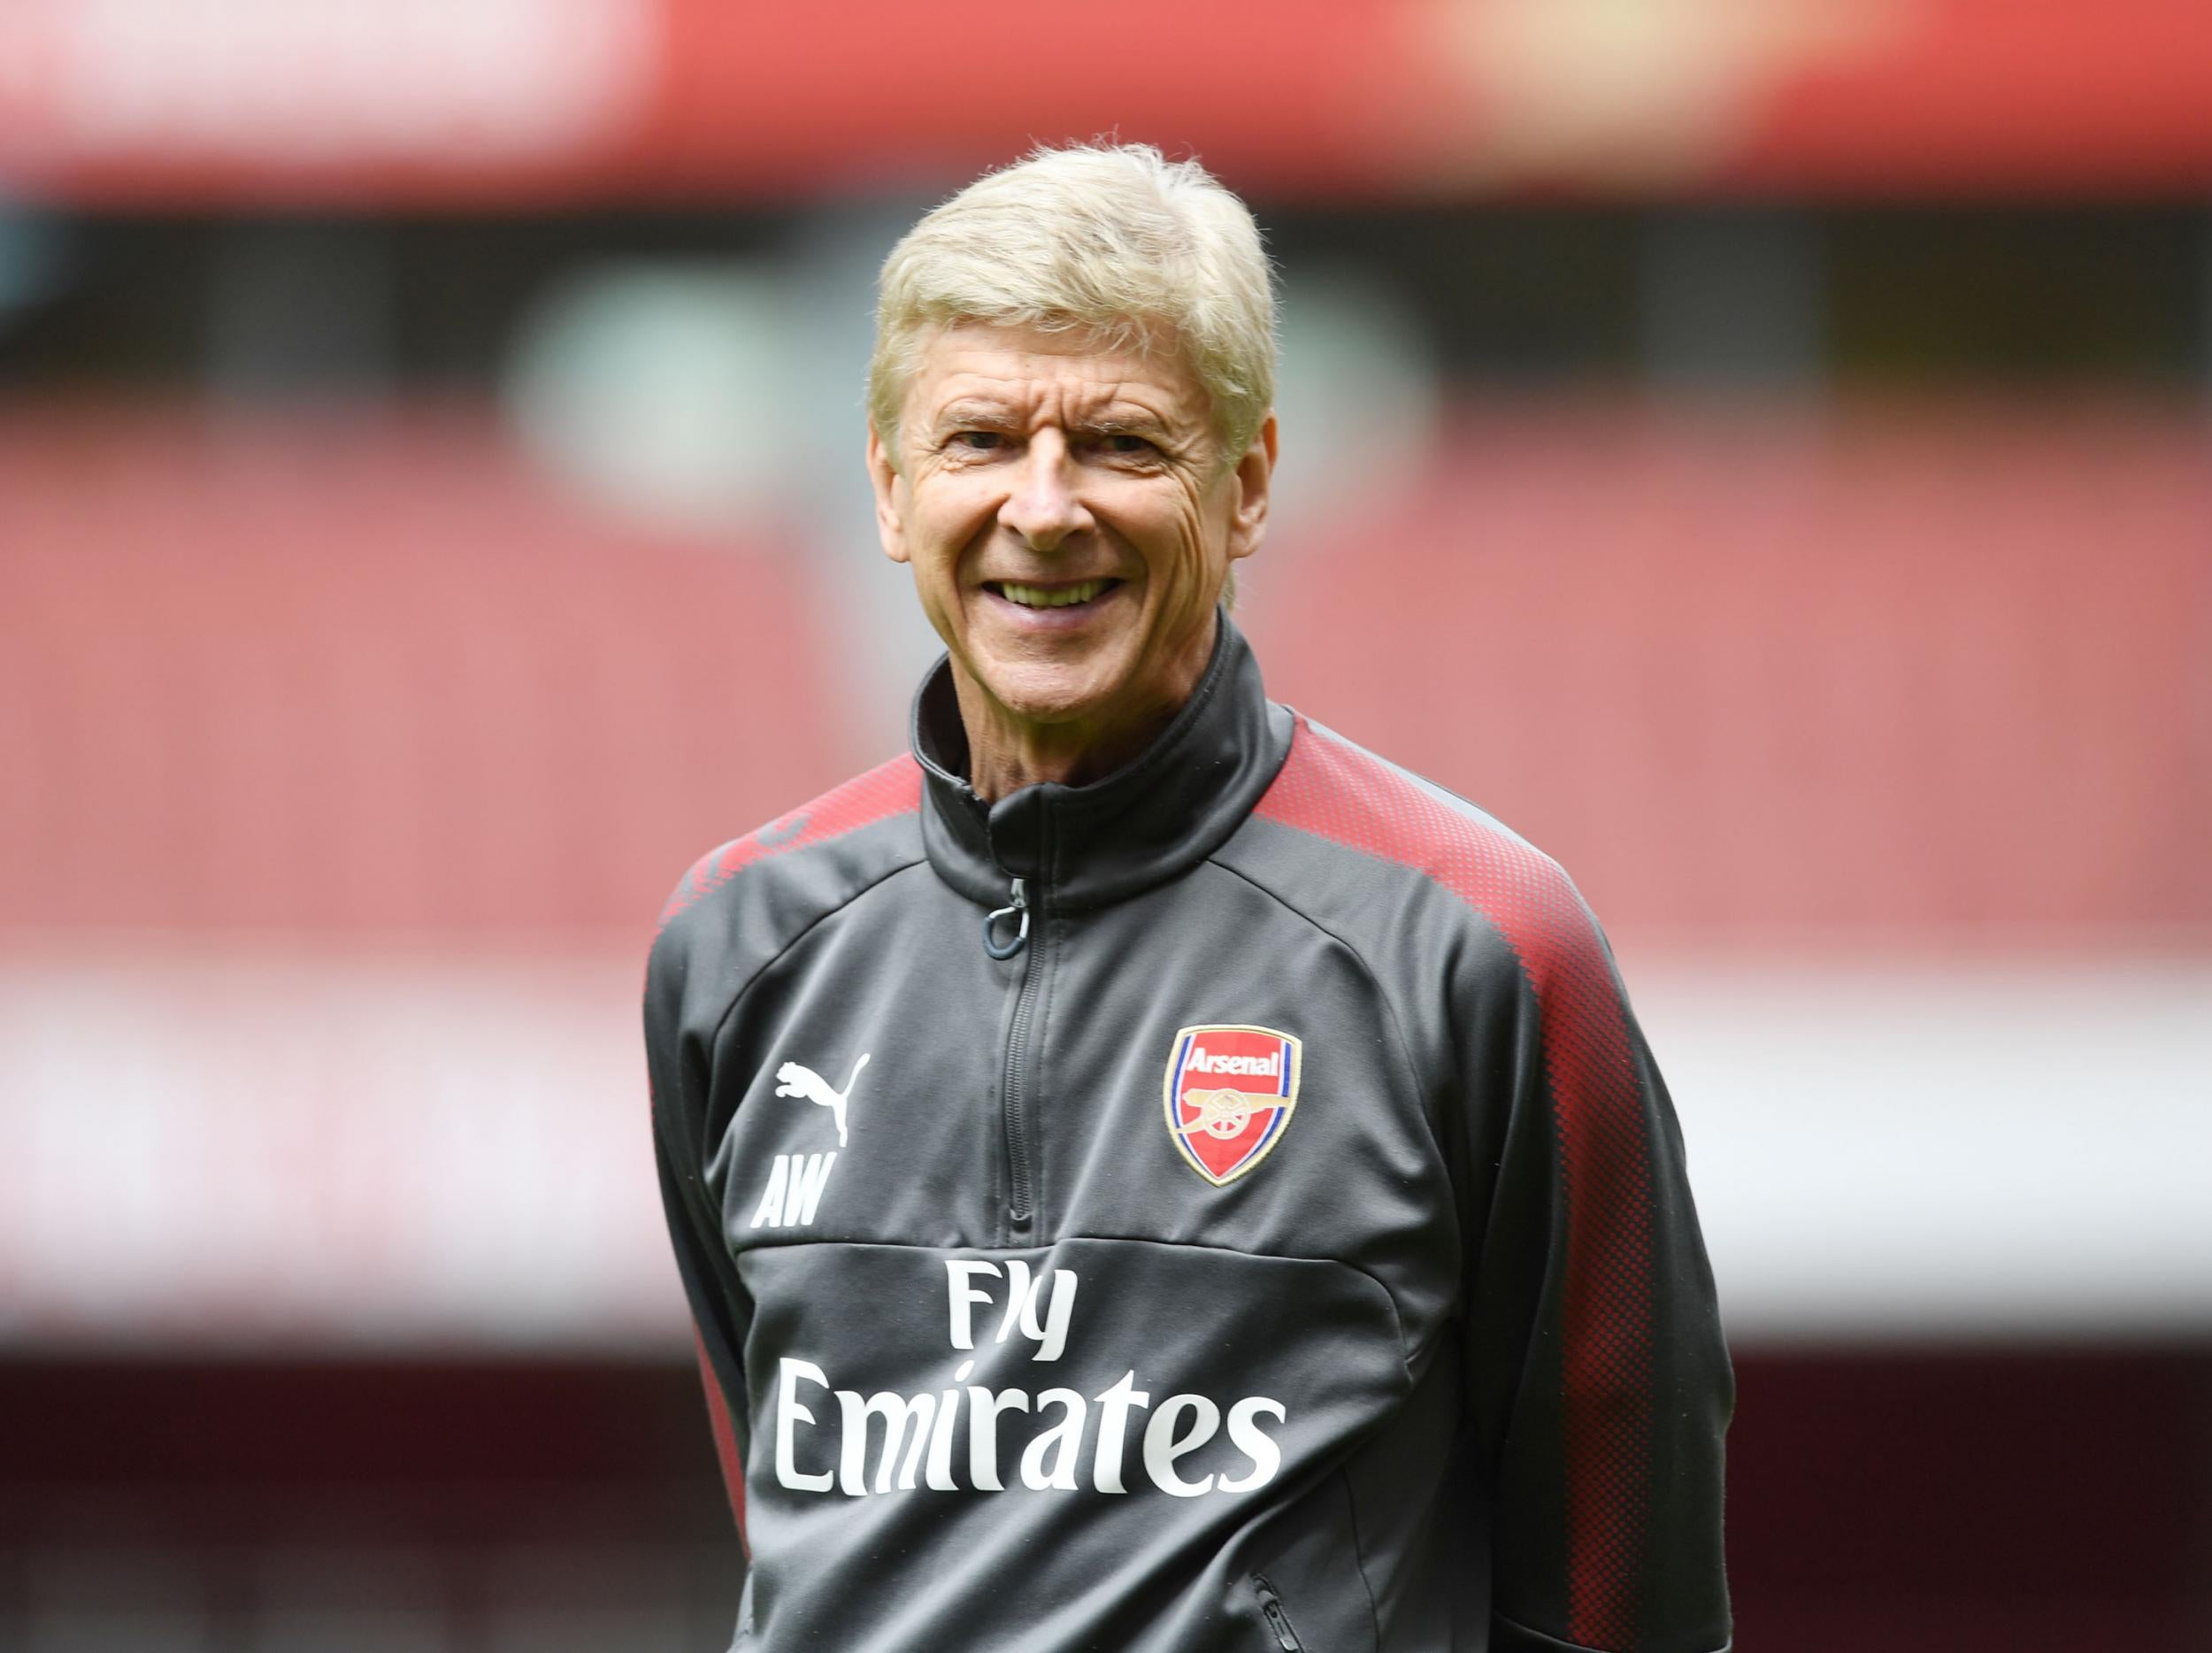 Wenger will mix up his squad for Europa League fixtures